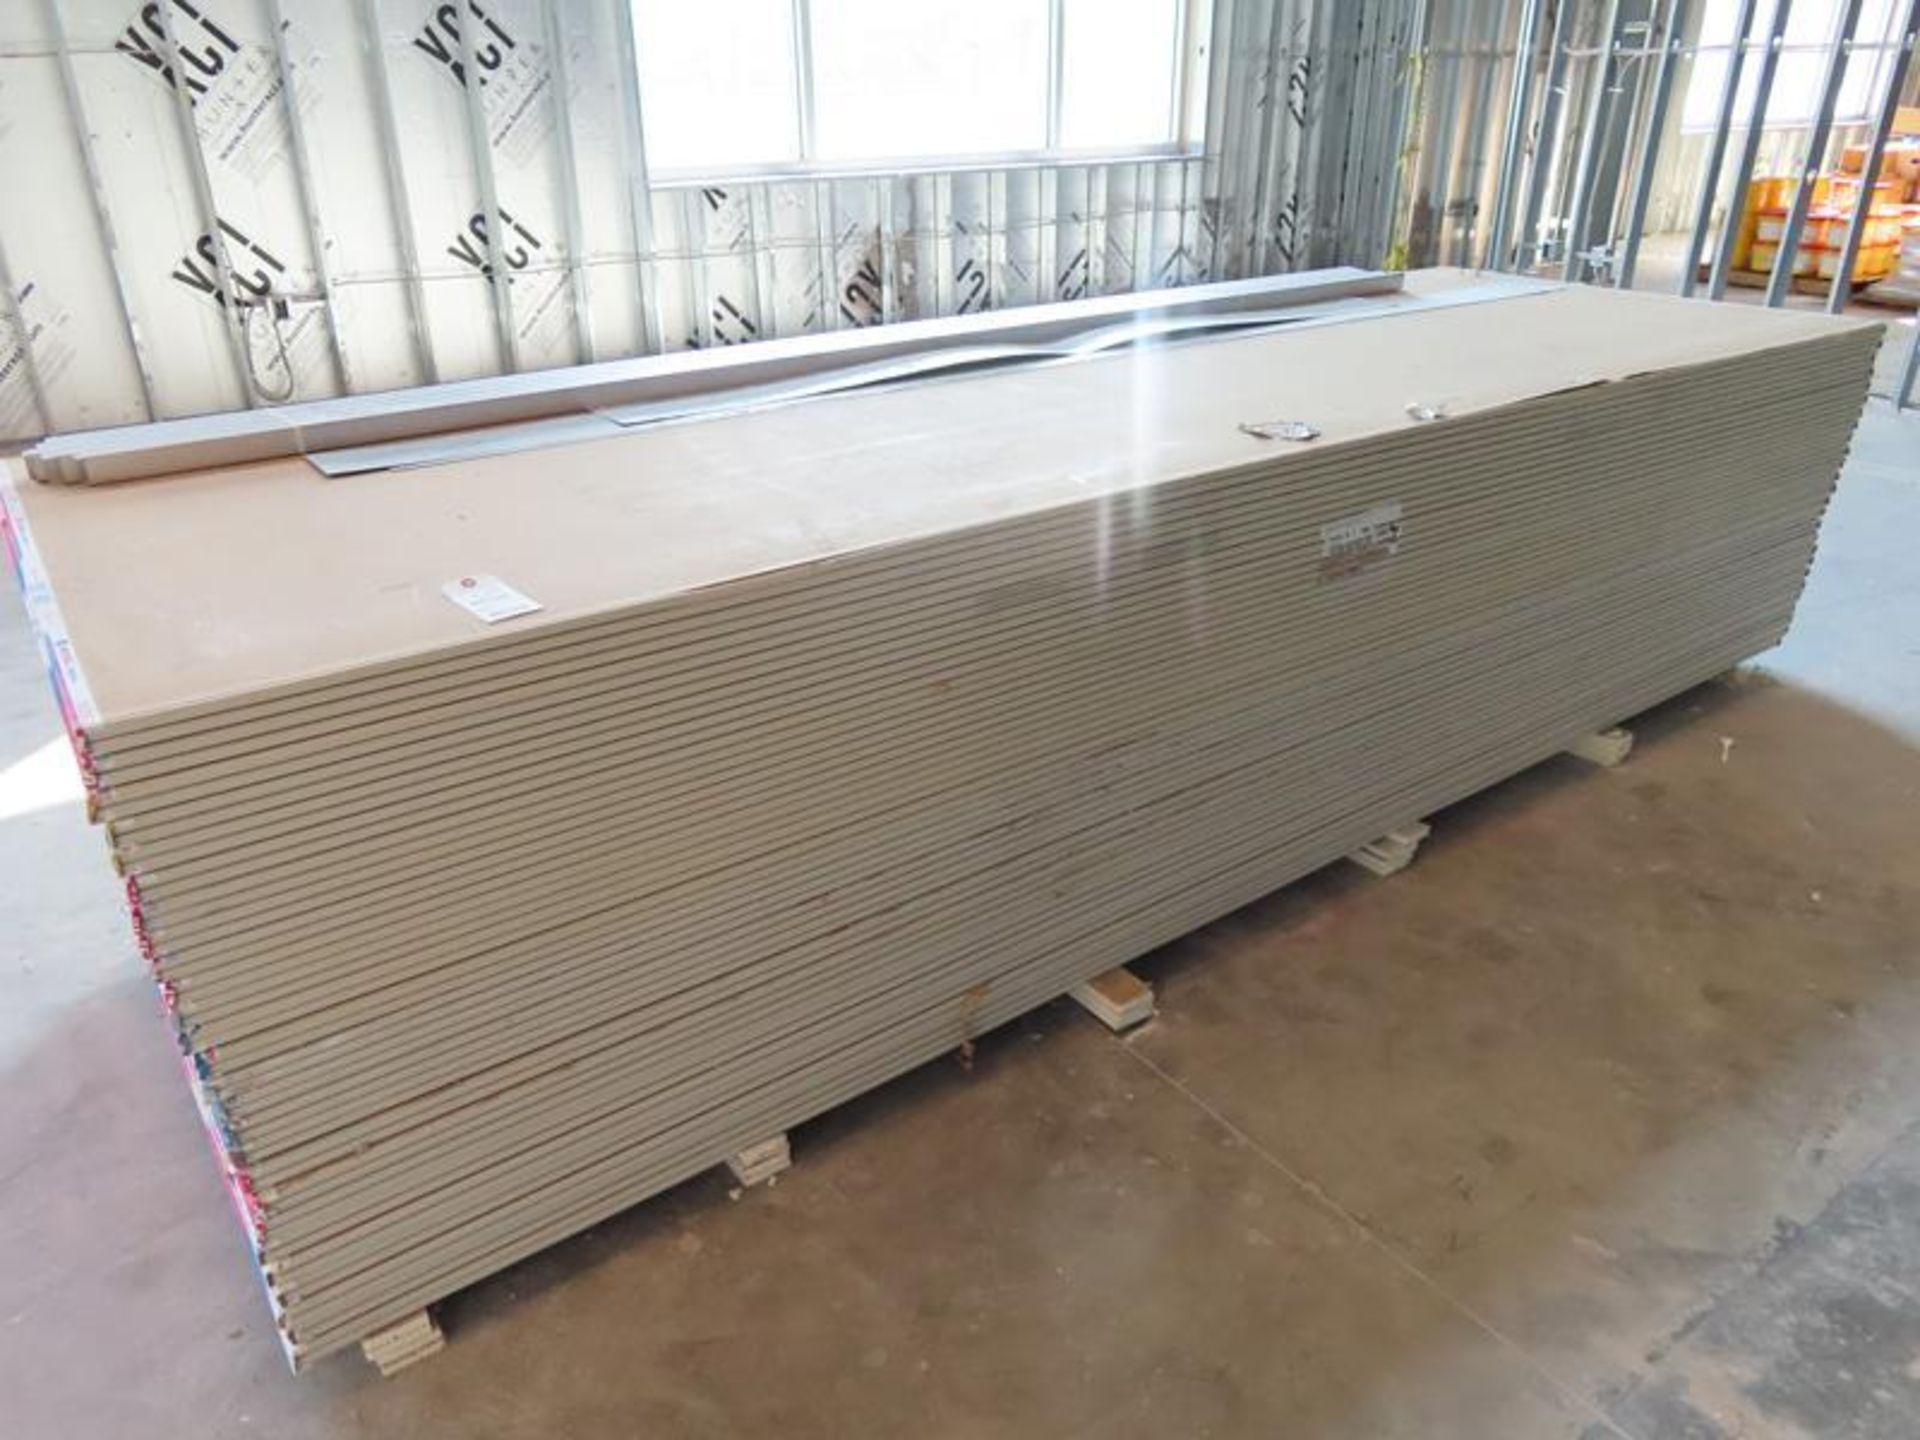 PALLET OF FIRECODE CORE TYPE X SHEETROCK, APPROXIMATELY 50 SHEETS